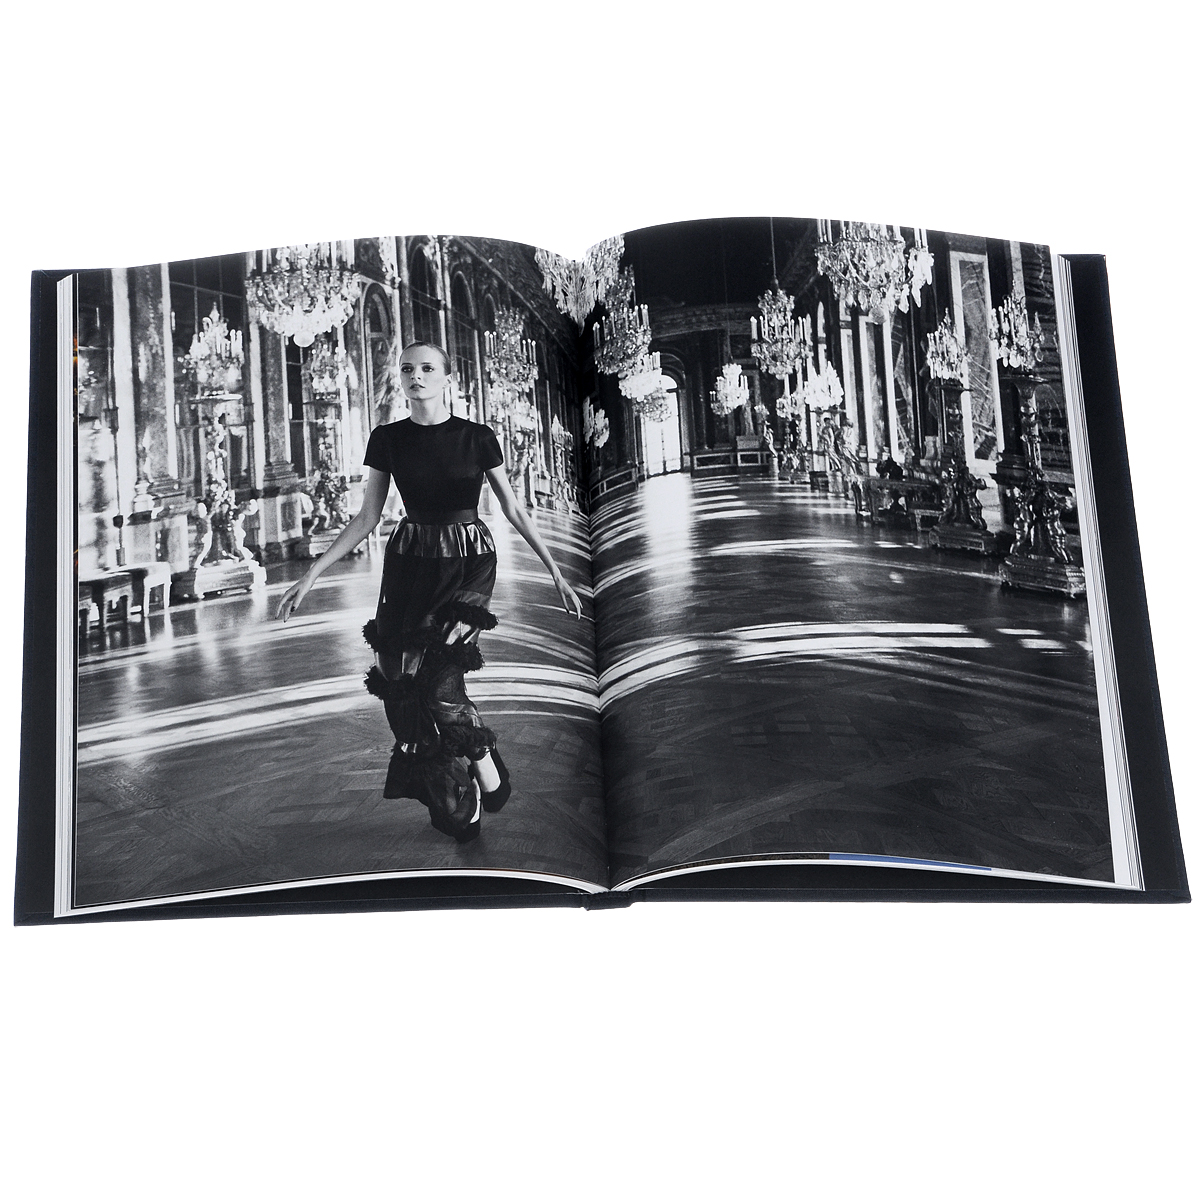 Dior the Legendary Images: Great Photographers and Dior